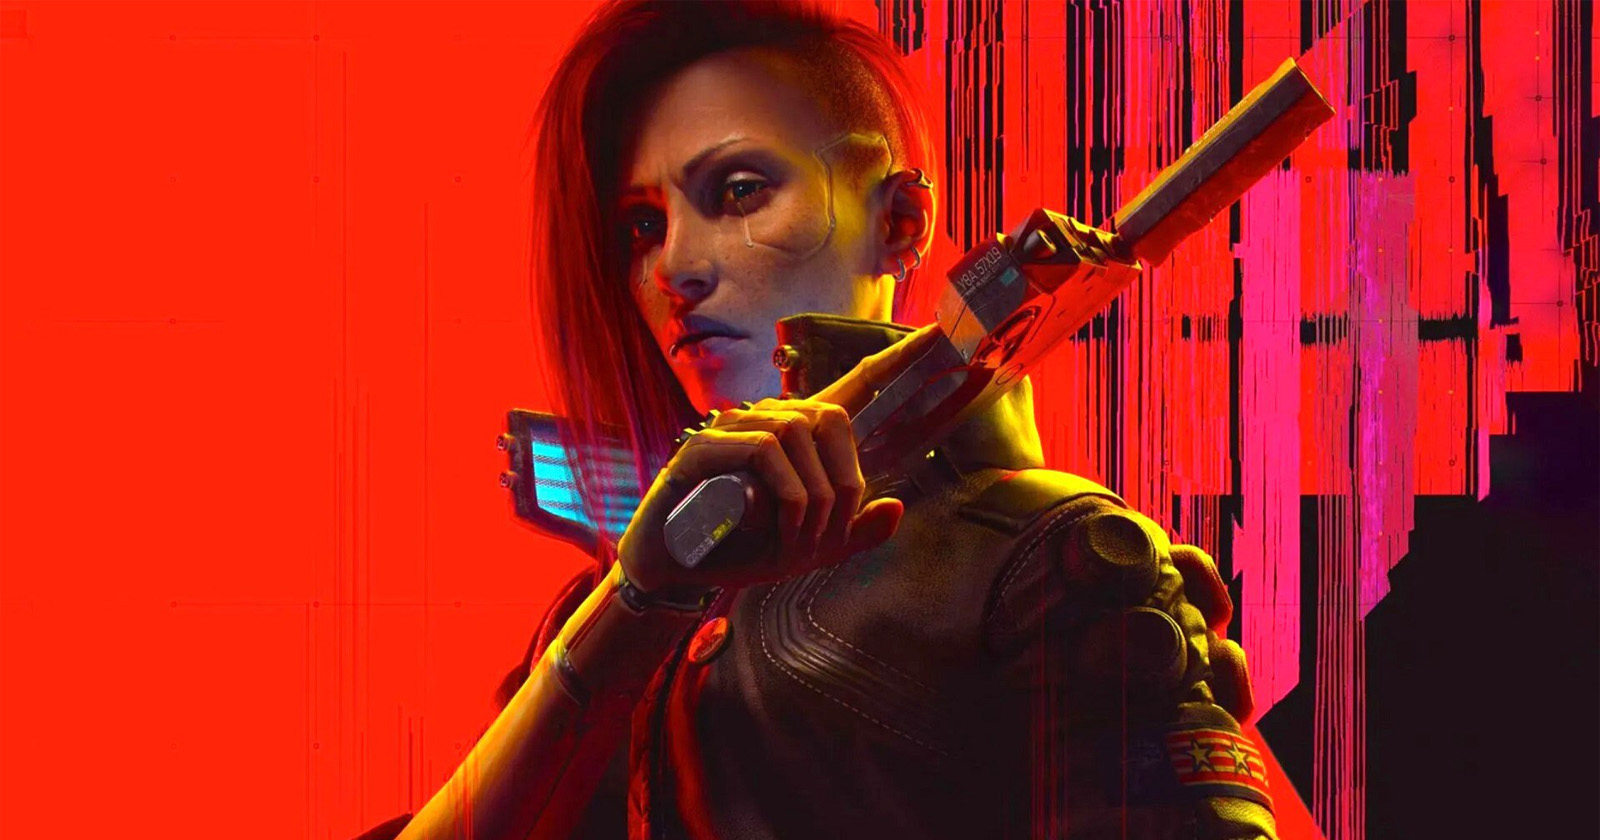 No one is working on Cyberpunk 2077 anymore